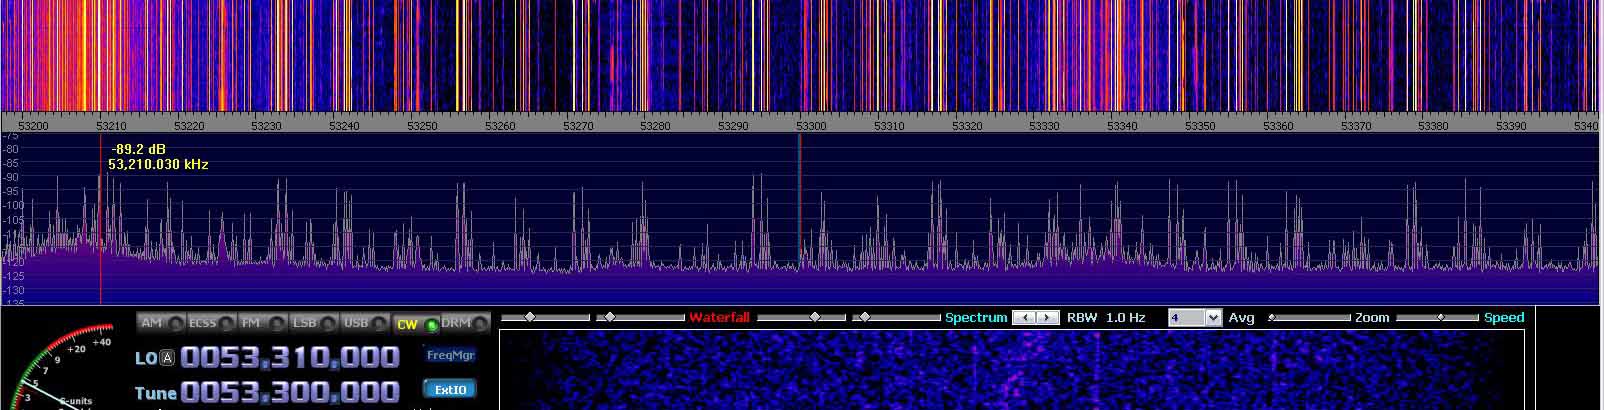 2014-07-04 53.300 MHz +- 100 kHz - Strong Es - 4-el dipole array with ends to St P - (c) OH7HJ.JPG